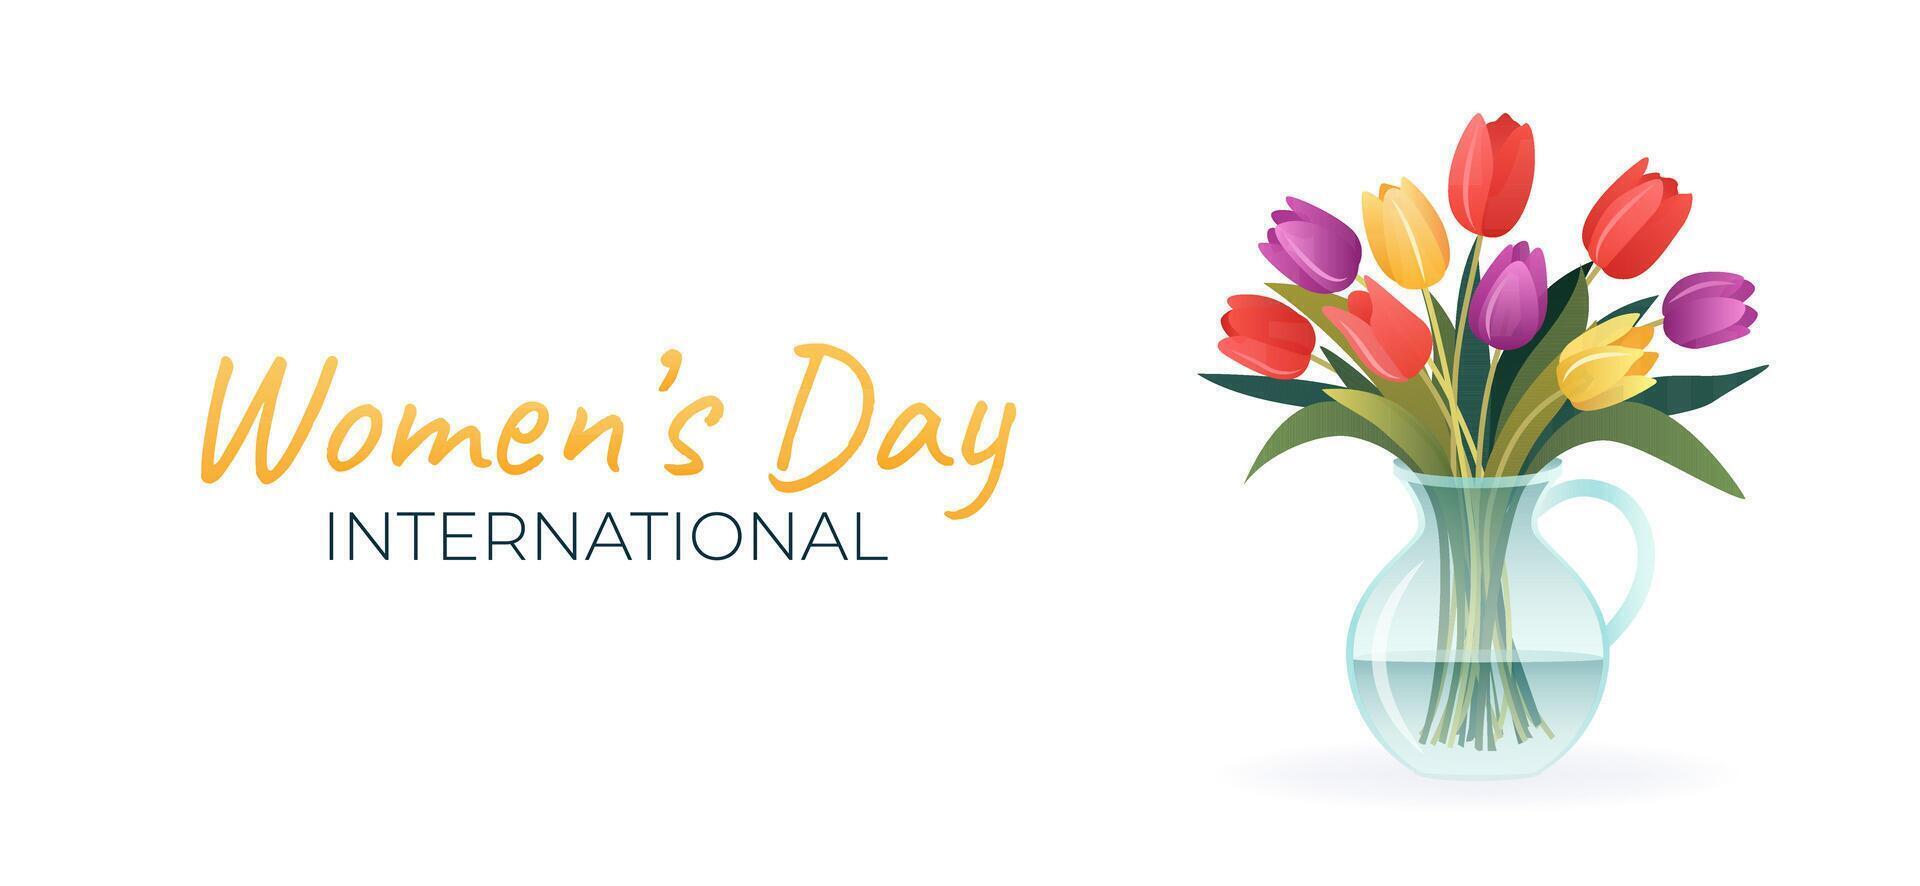 International Women's Day. 8 March. Banner with isolated vase and bouquet of tulips. Spring flowers on white background. Modern vector design for poster, campaign, social media post.